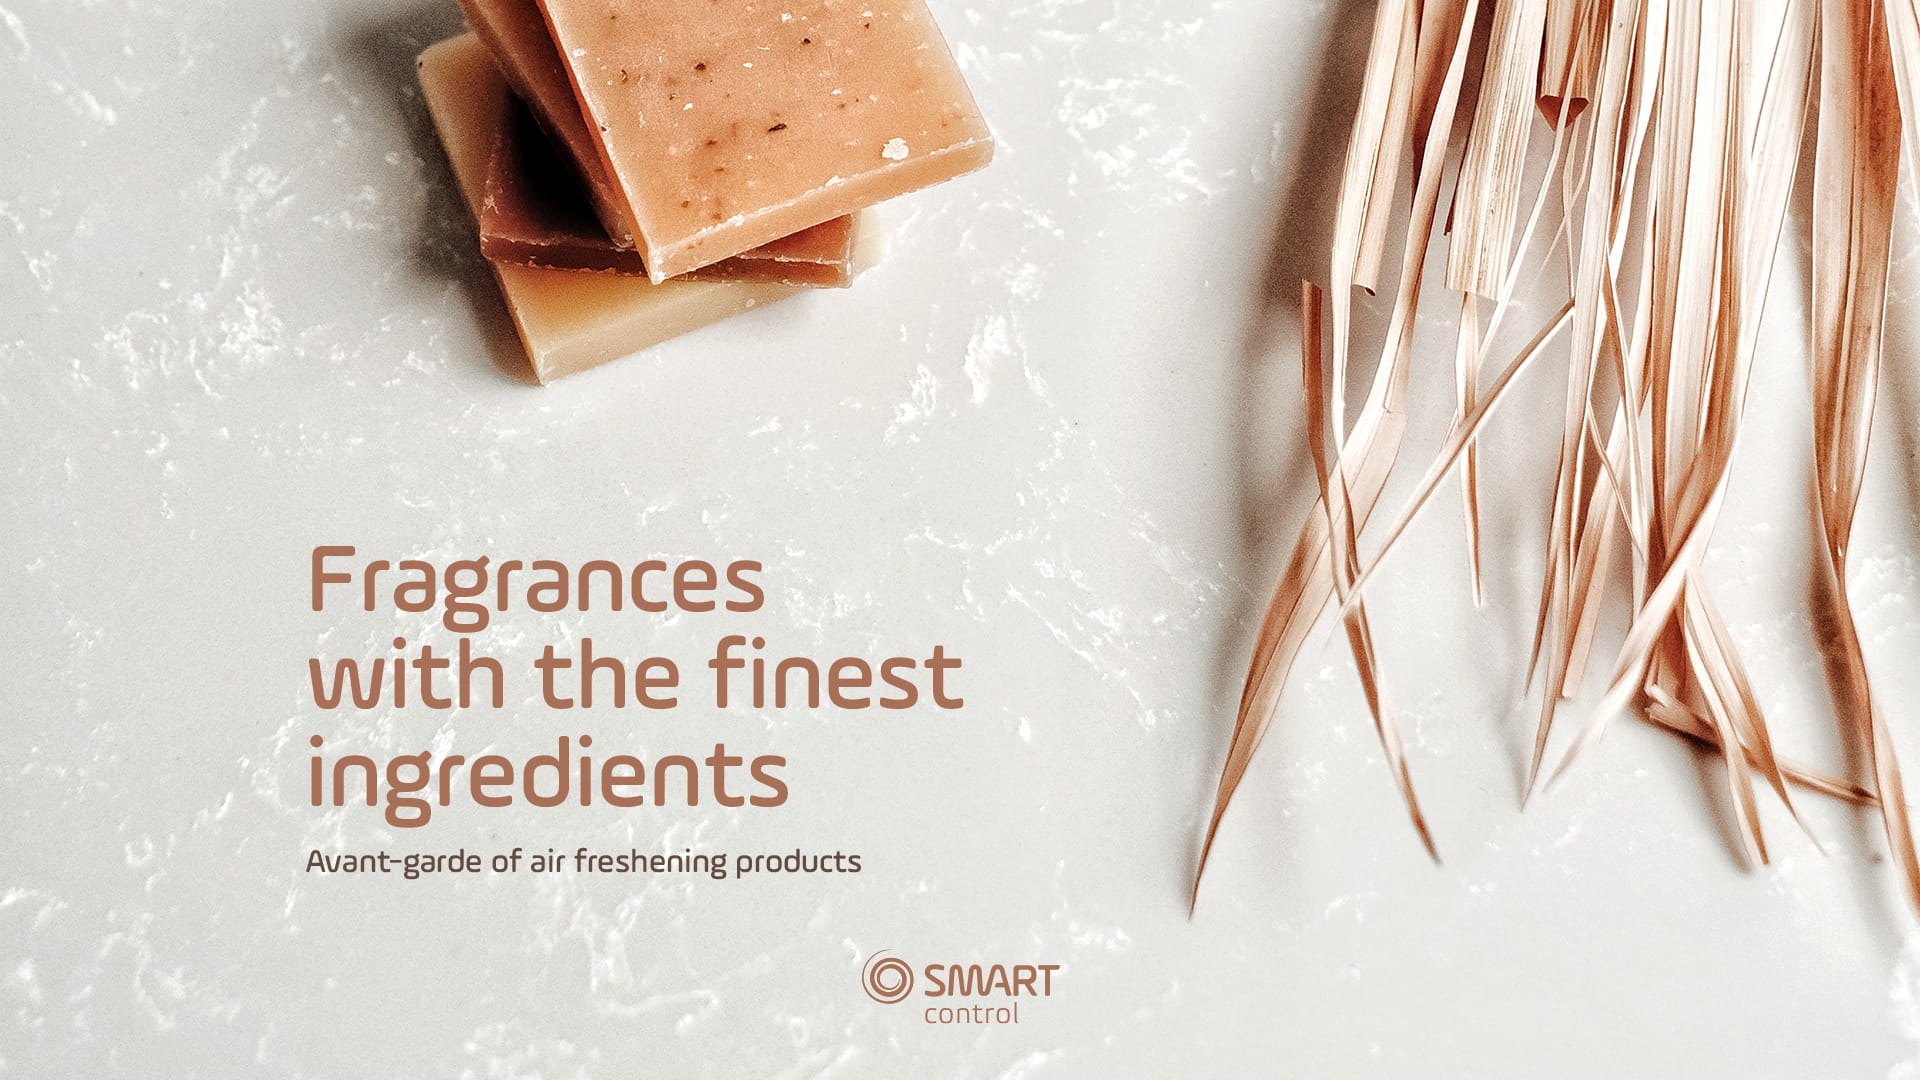 Fragances with the finest ingredients